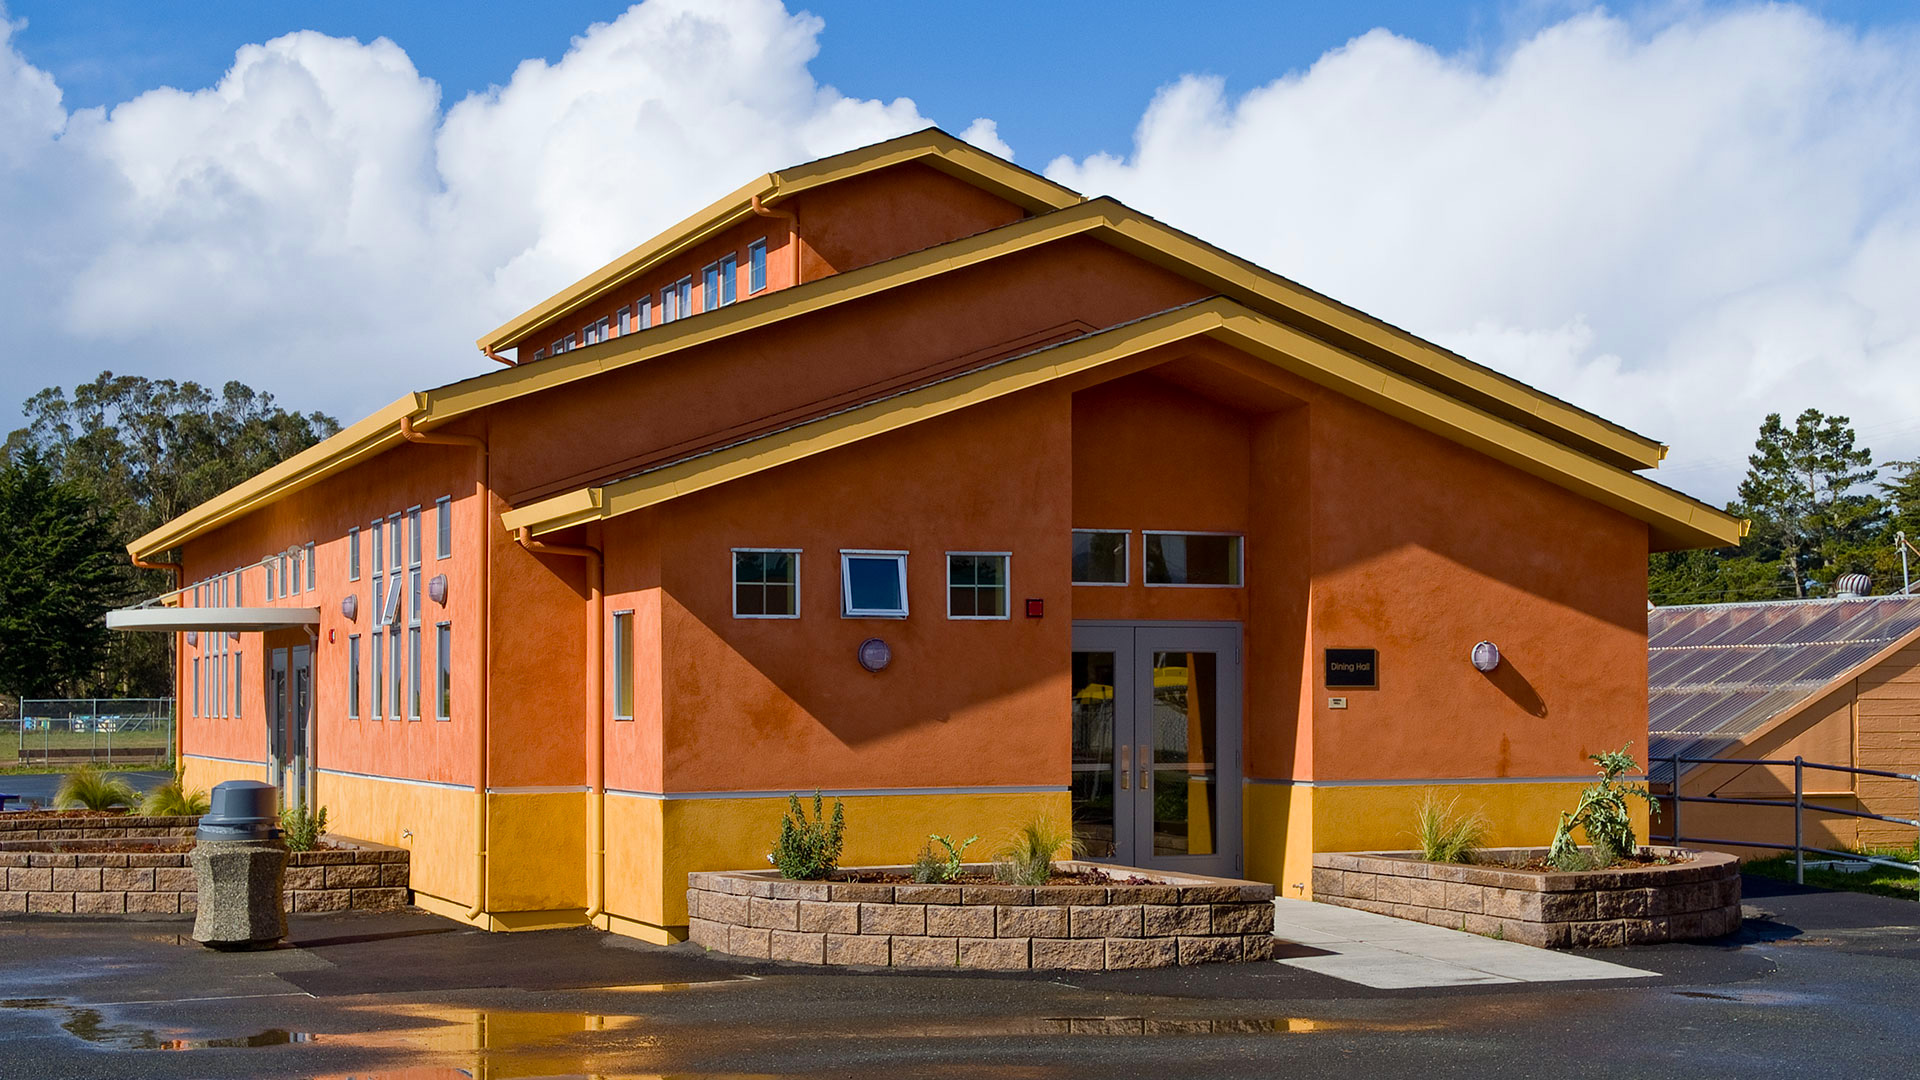 Exterior of completed cafeteria. Orange walls with a yellow wainscot and trim, with a black shingled roof.